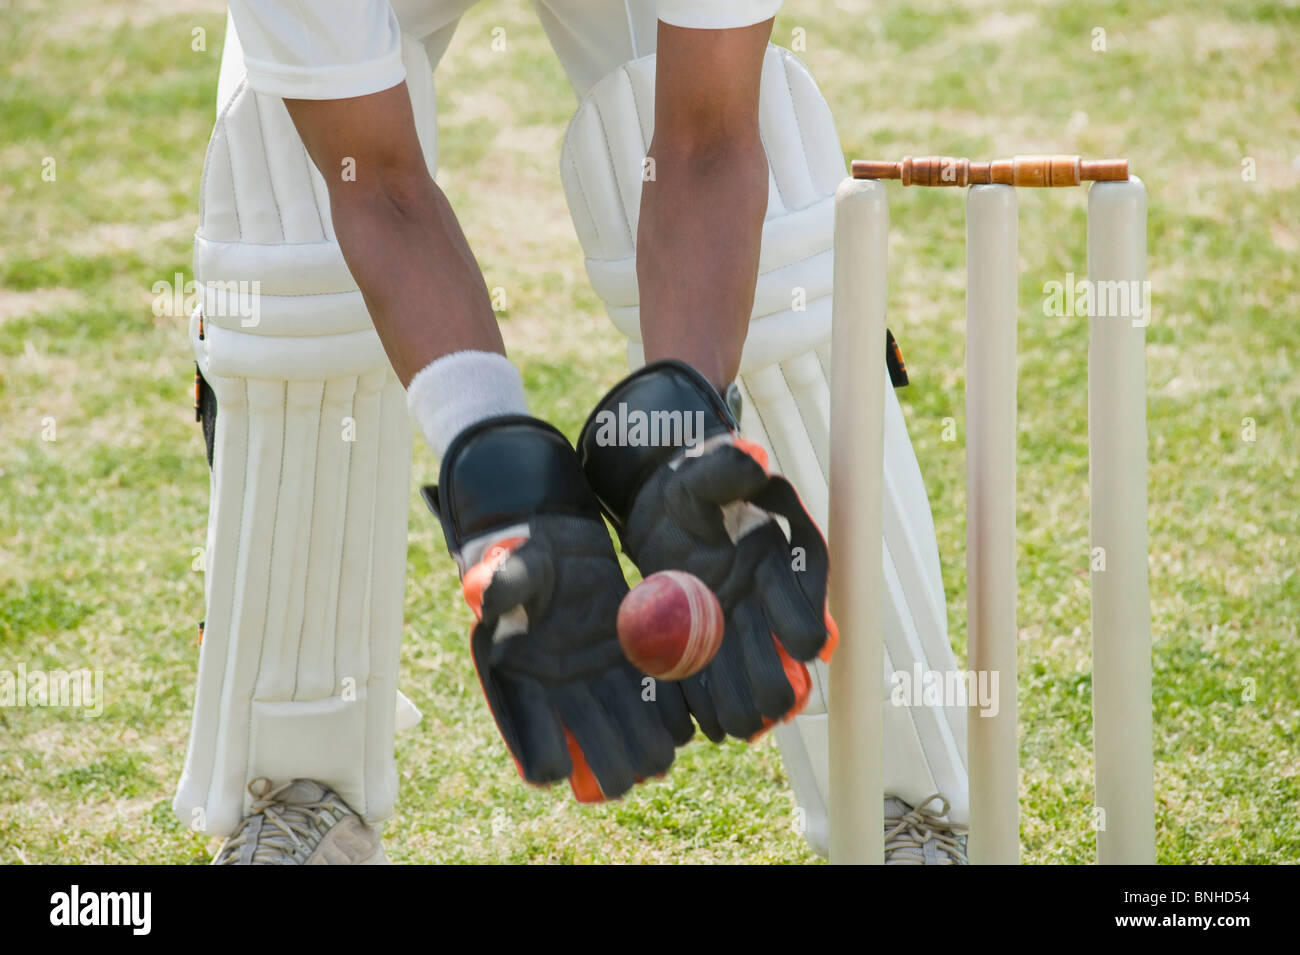 Cricket wicketkeeper catching a ball behind stumps Stock Photo